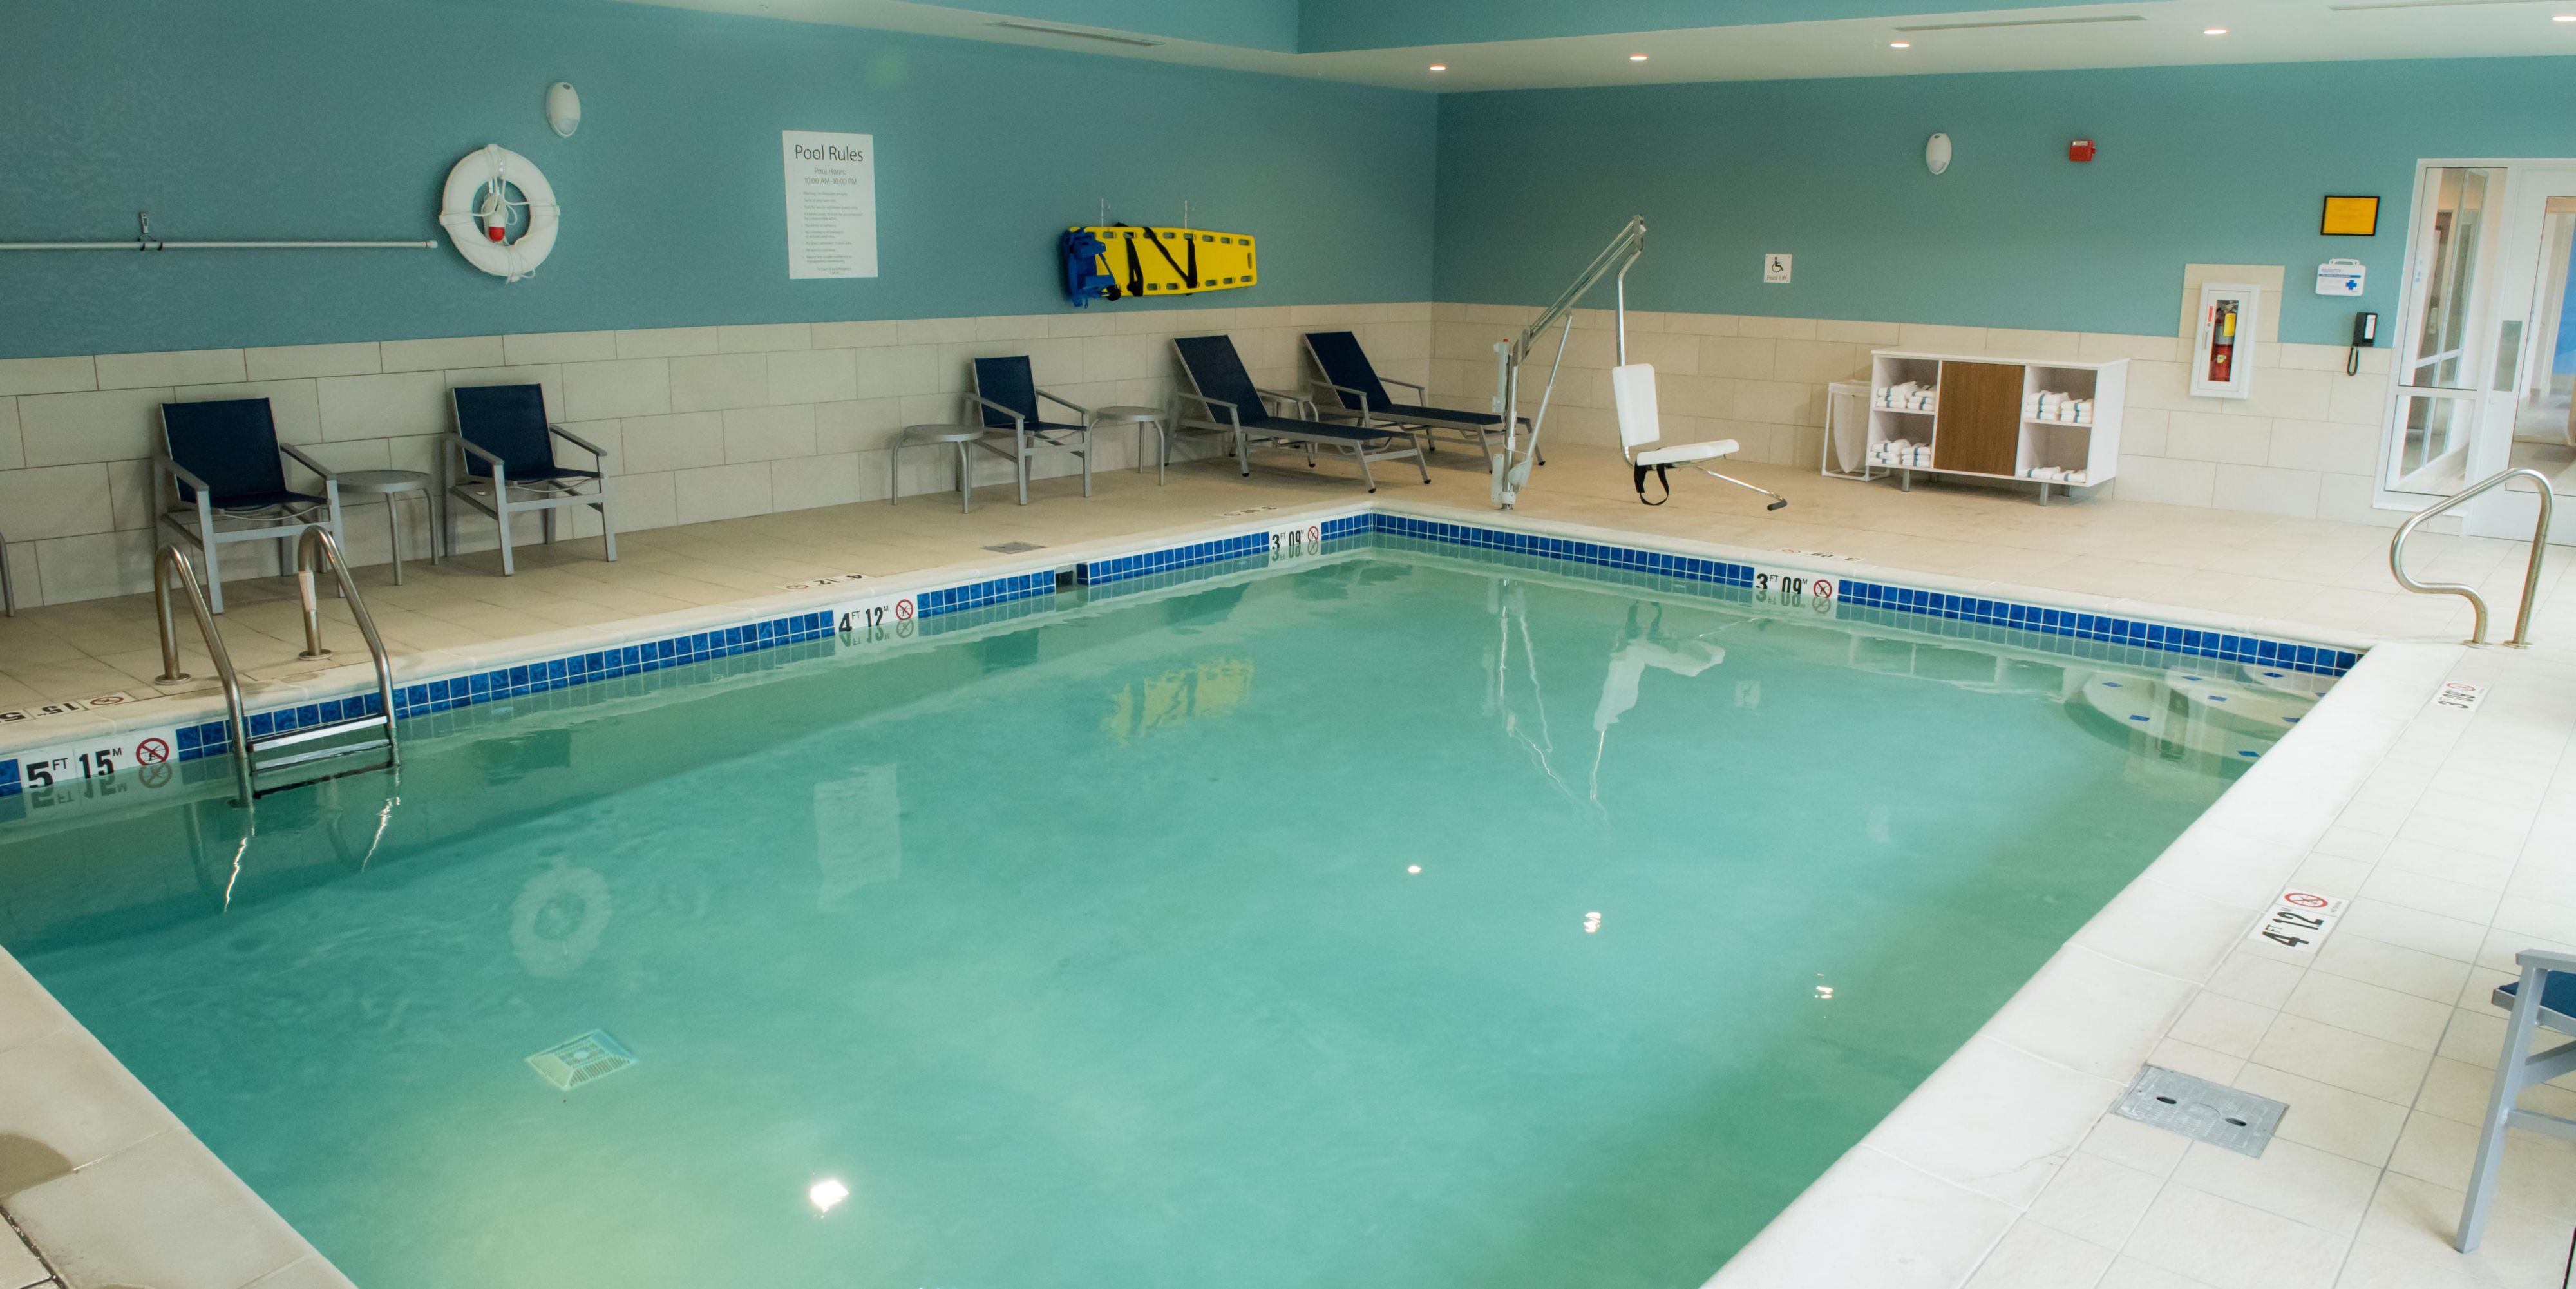 Make sure you take time to enjoy our heated indoor swimming pool.